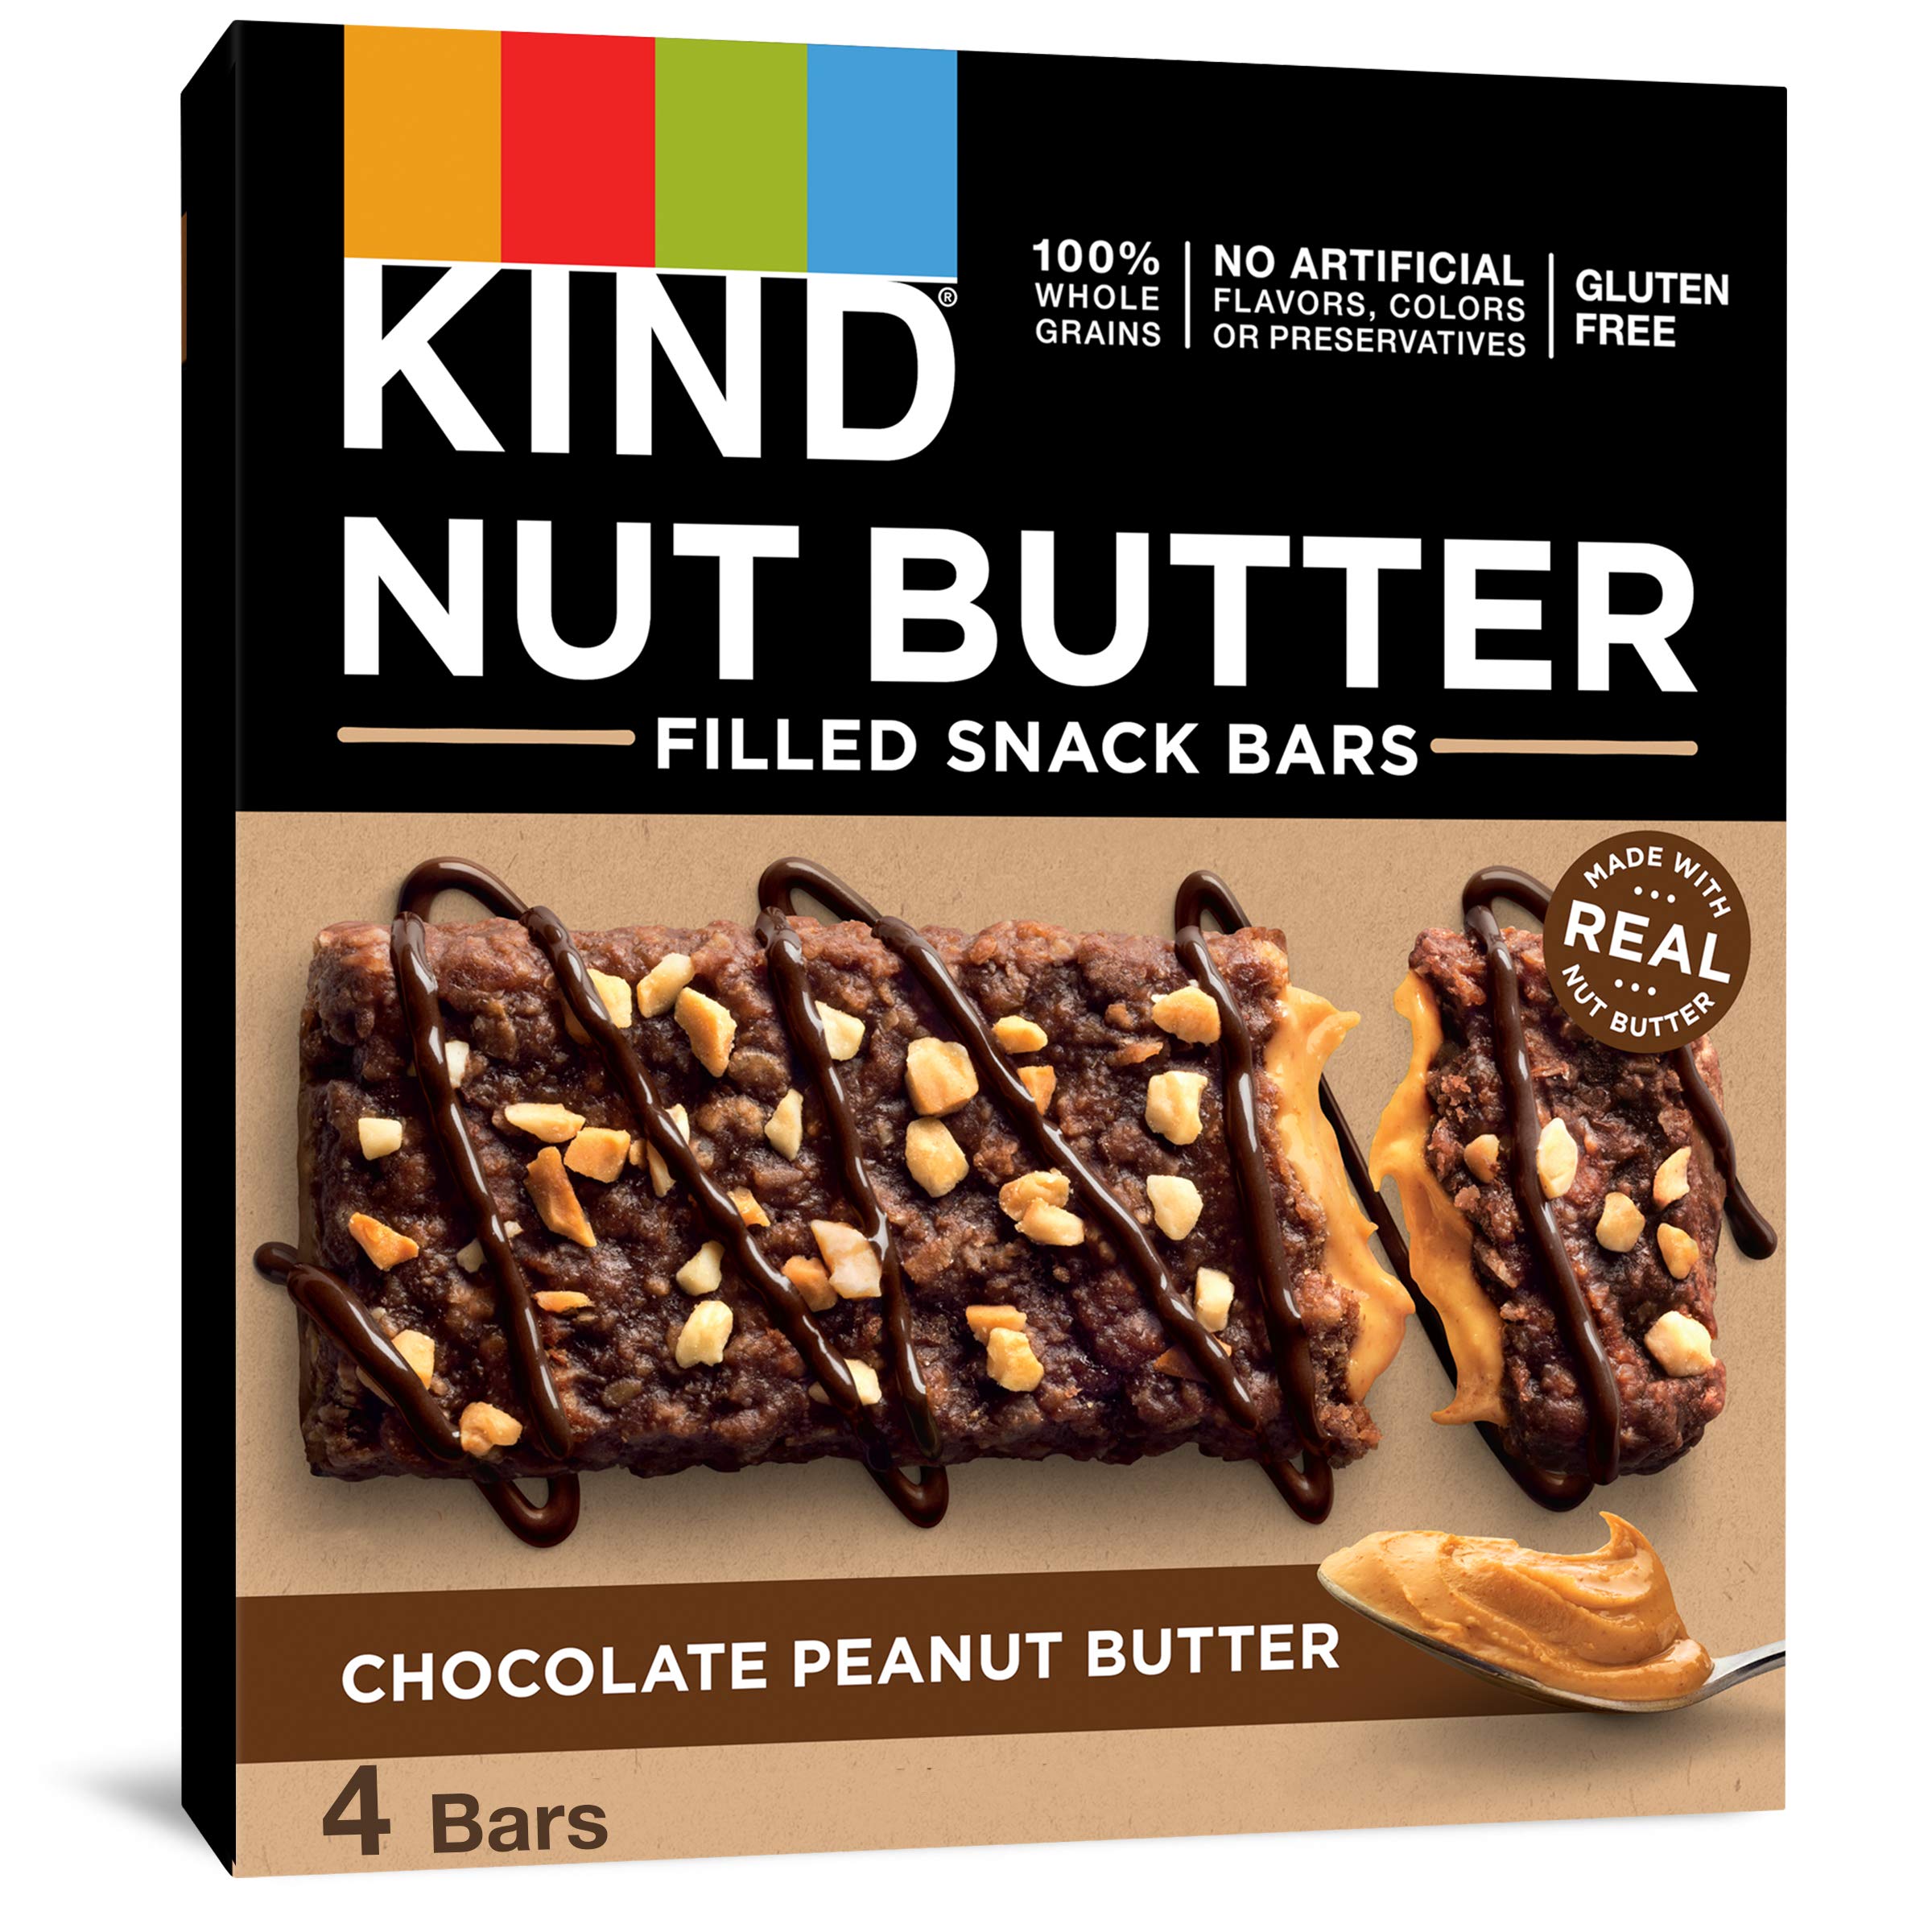 KIND Nut Butter Bars, Chocolate Peanut Butter, 1.3 Ounce, 32 Count, Gluten Free, 100% Whole Grains~$13.14 @ Amazon~Free Prime Shipping!